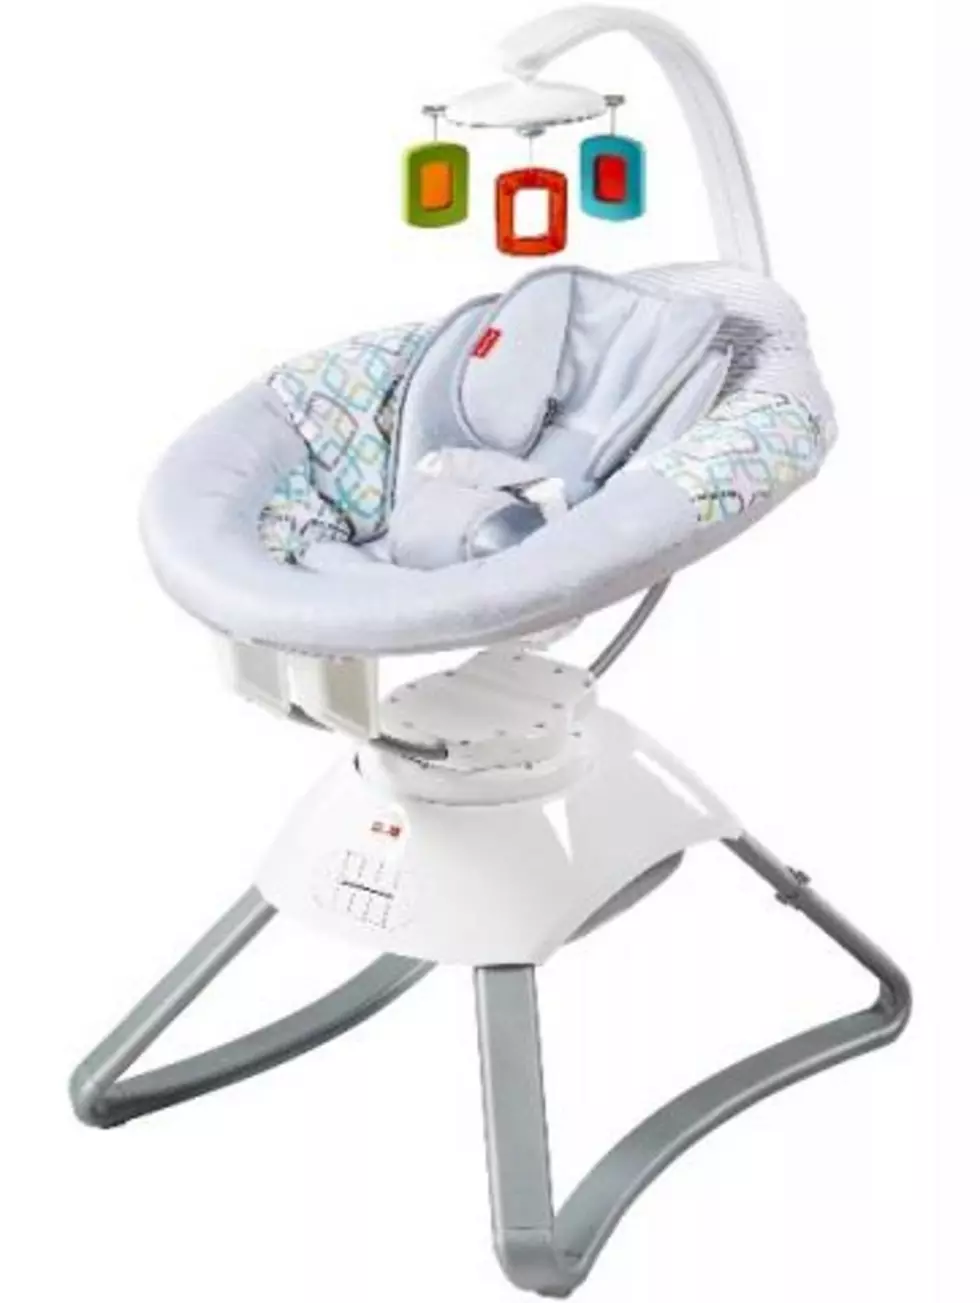 Fisher-Price Infant Motion Seats Recalled Due To Fire Hazard